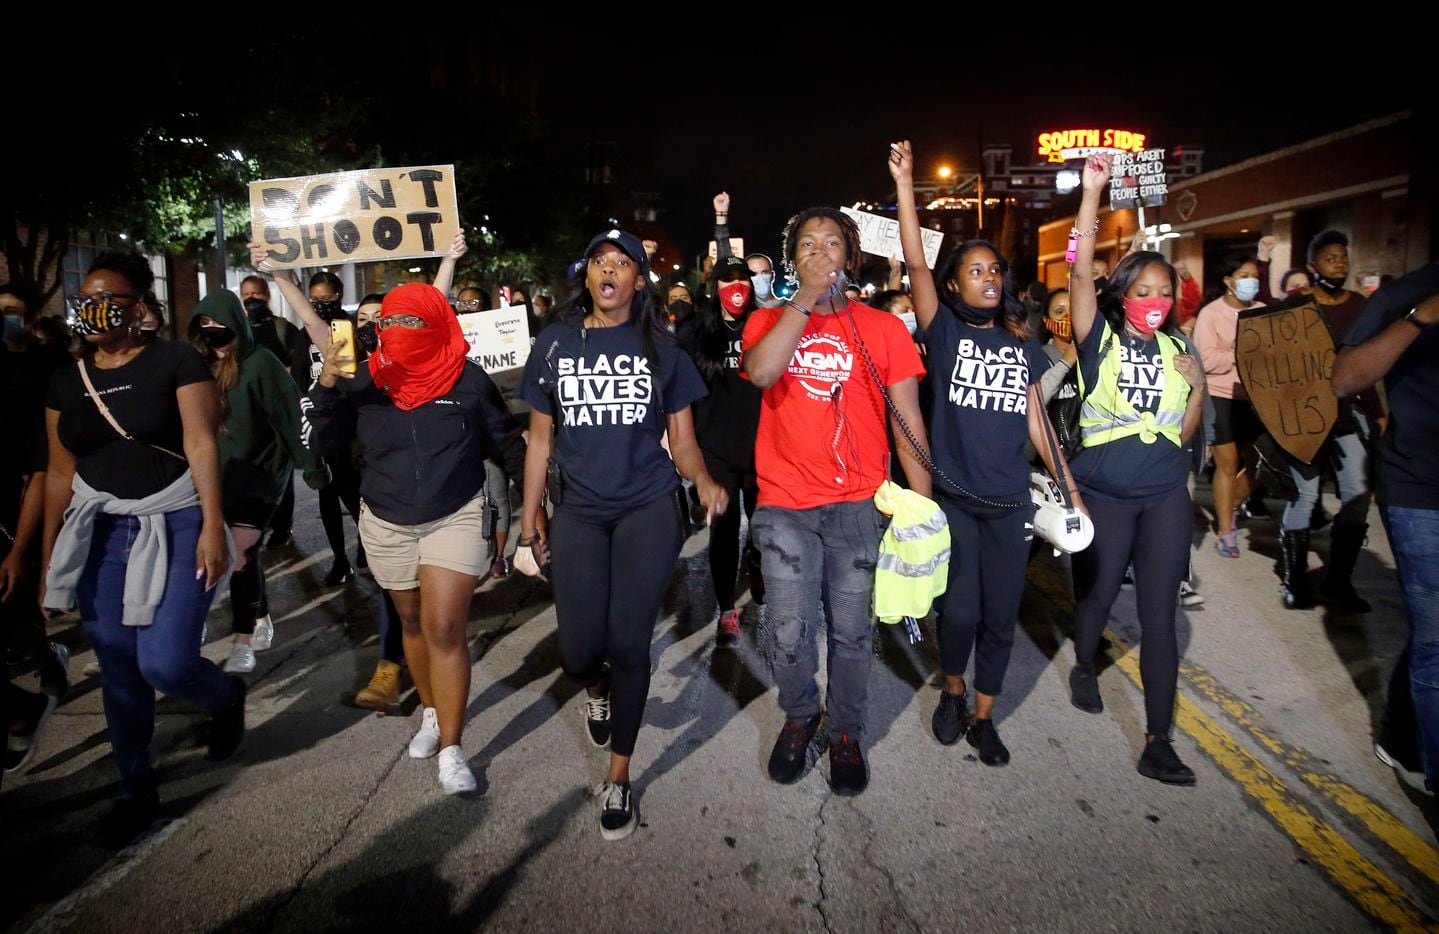 Next Generation Action Network led a protest and march down Lamar St. in support of Breonna Taylor in Dallas, Wednesday, September 23, 2020. A Kentucky grand jury brought no charges against the Louisville police for the killing of Taylor during a drug raid gone wrong. (Tom Fox/The Dallas Morning News)